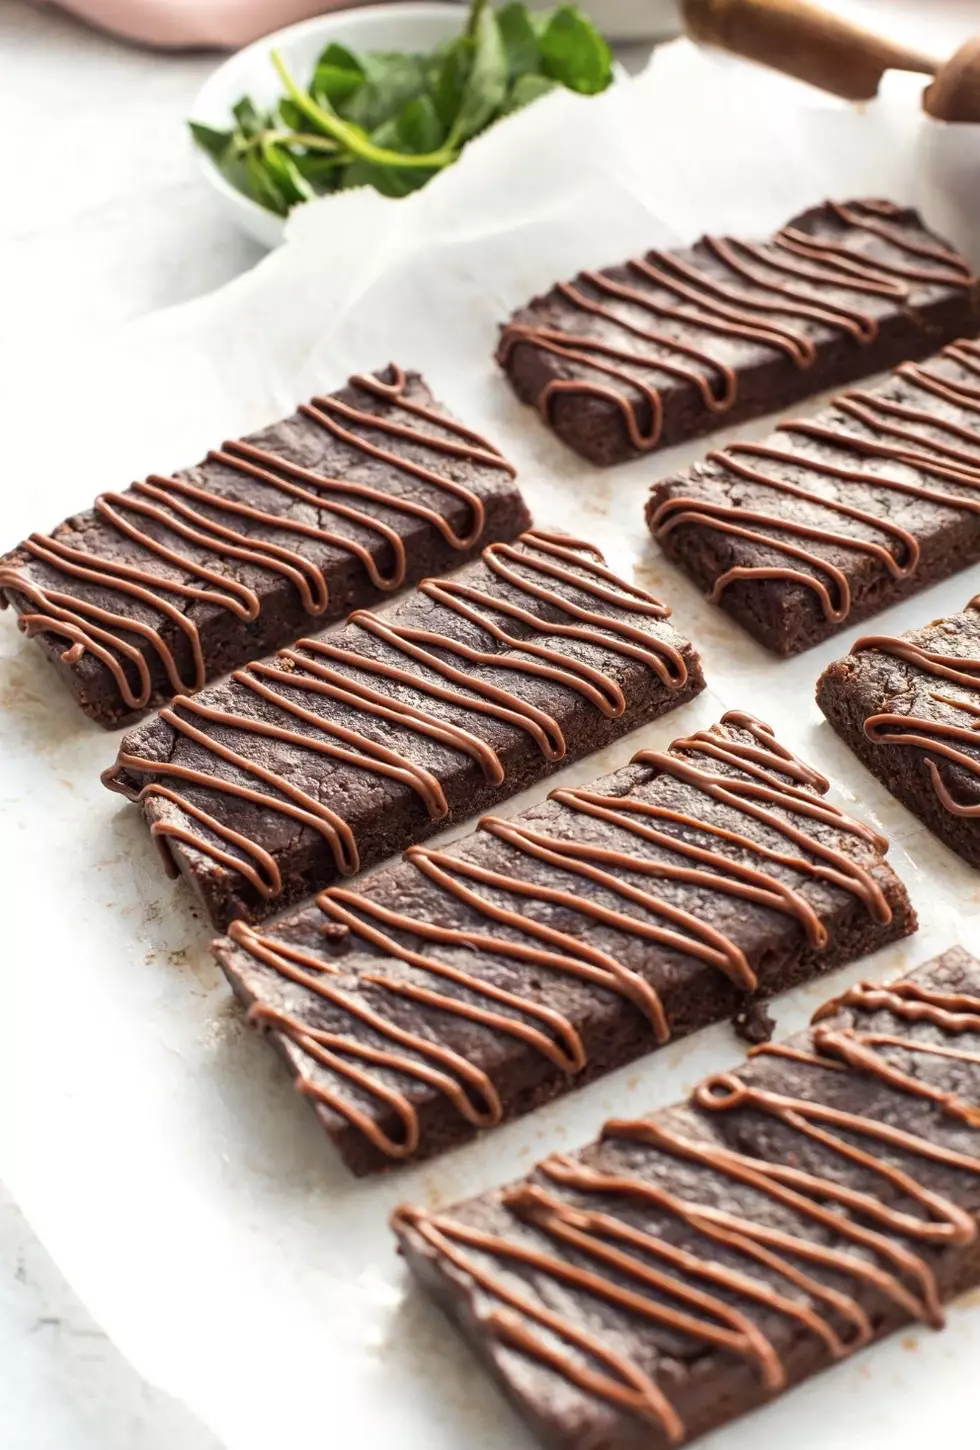 The Best Recipe for Post-Workout Recovery: Mint Chocolate Protein Bars